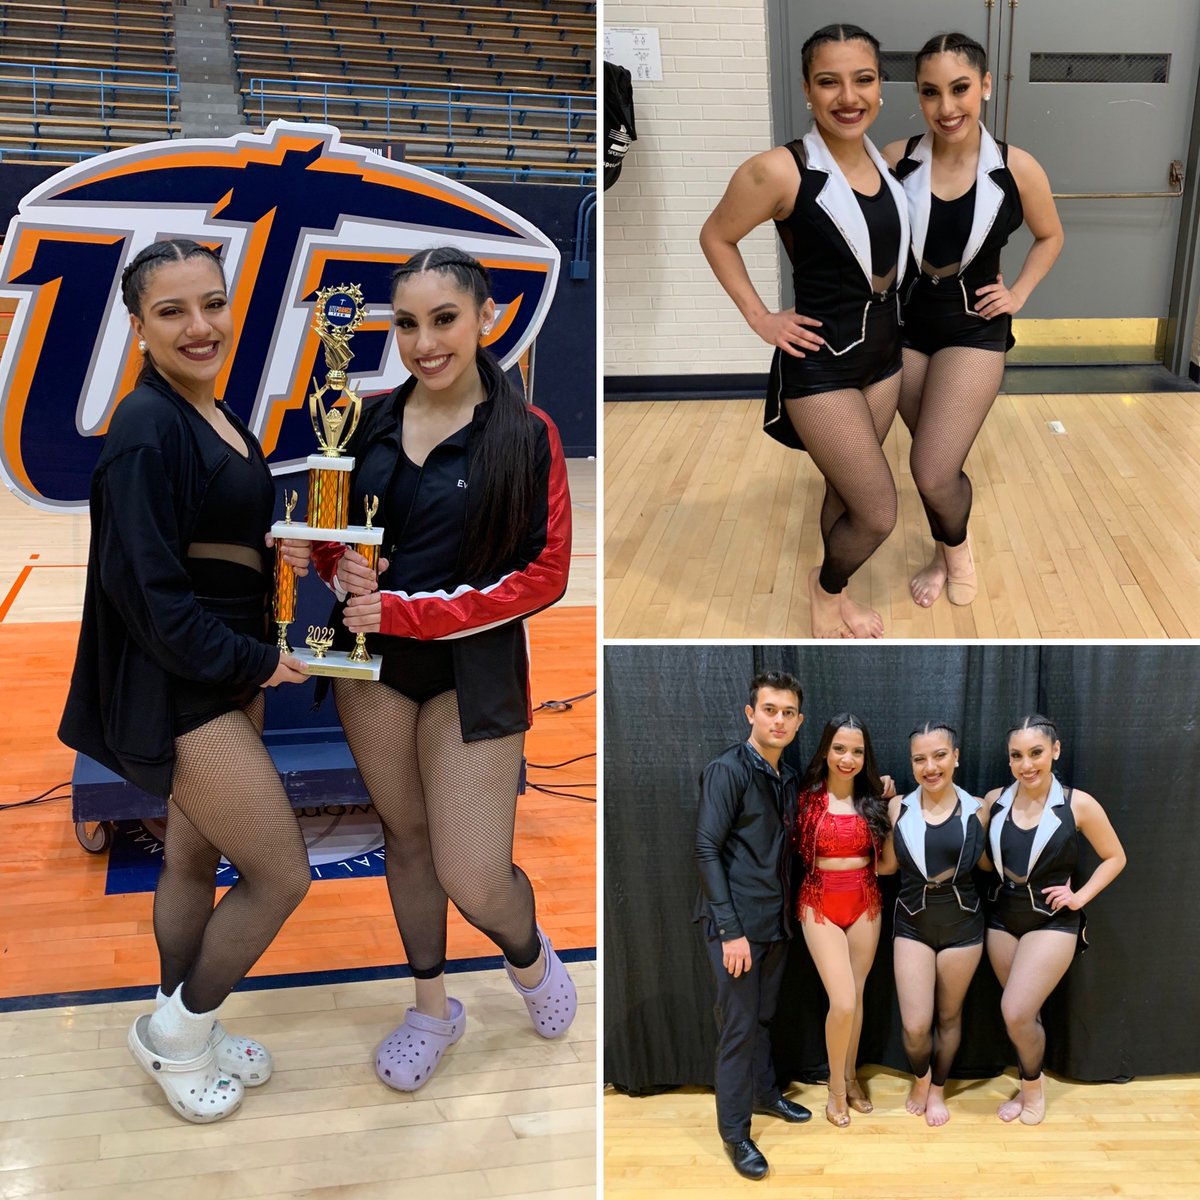 Yes!!! Congrats to our team captains, Lily and Evelyn for receiving 1st place on their duet at the UTEP Dance Competition. We’re proud of you! 🙌🏼💜@UTEPDanceTeam @DVHSYISD 
@YISDFineArts 
@YsletaISD 
#OFOD #thedistrict